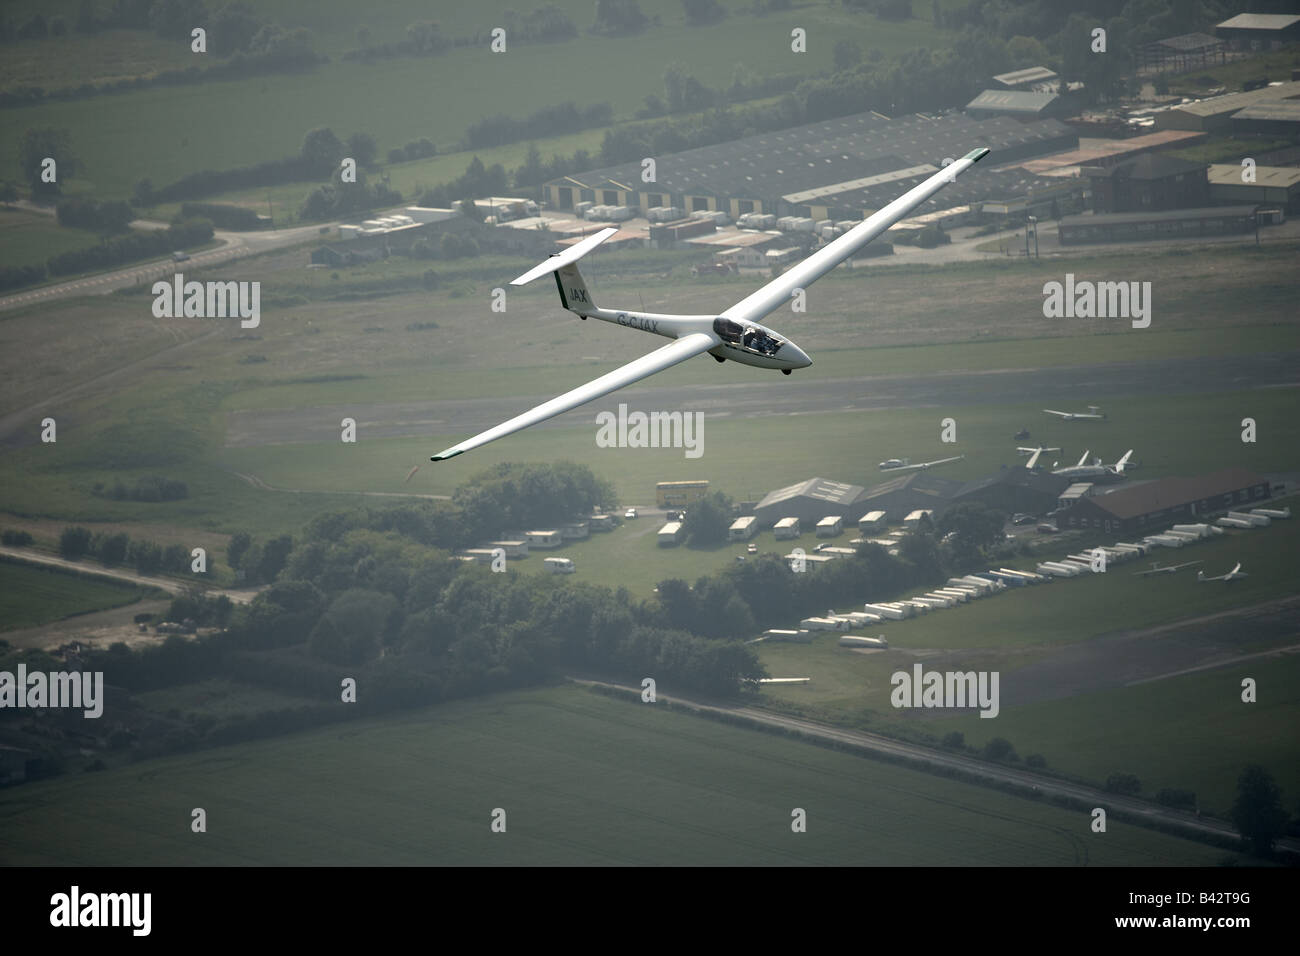 Glider flying over the wolds gliding club air base the old wartime airfield Pocklington East Yorkshire UK Stock Photo